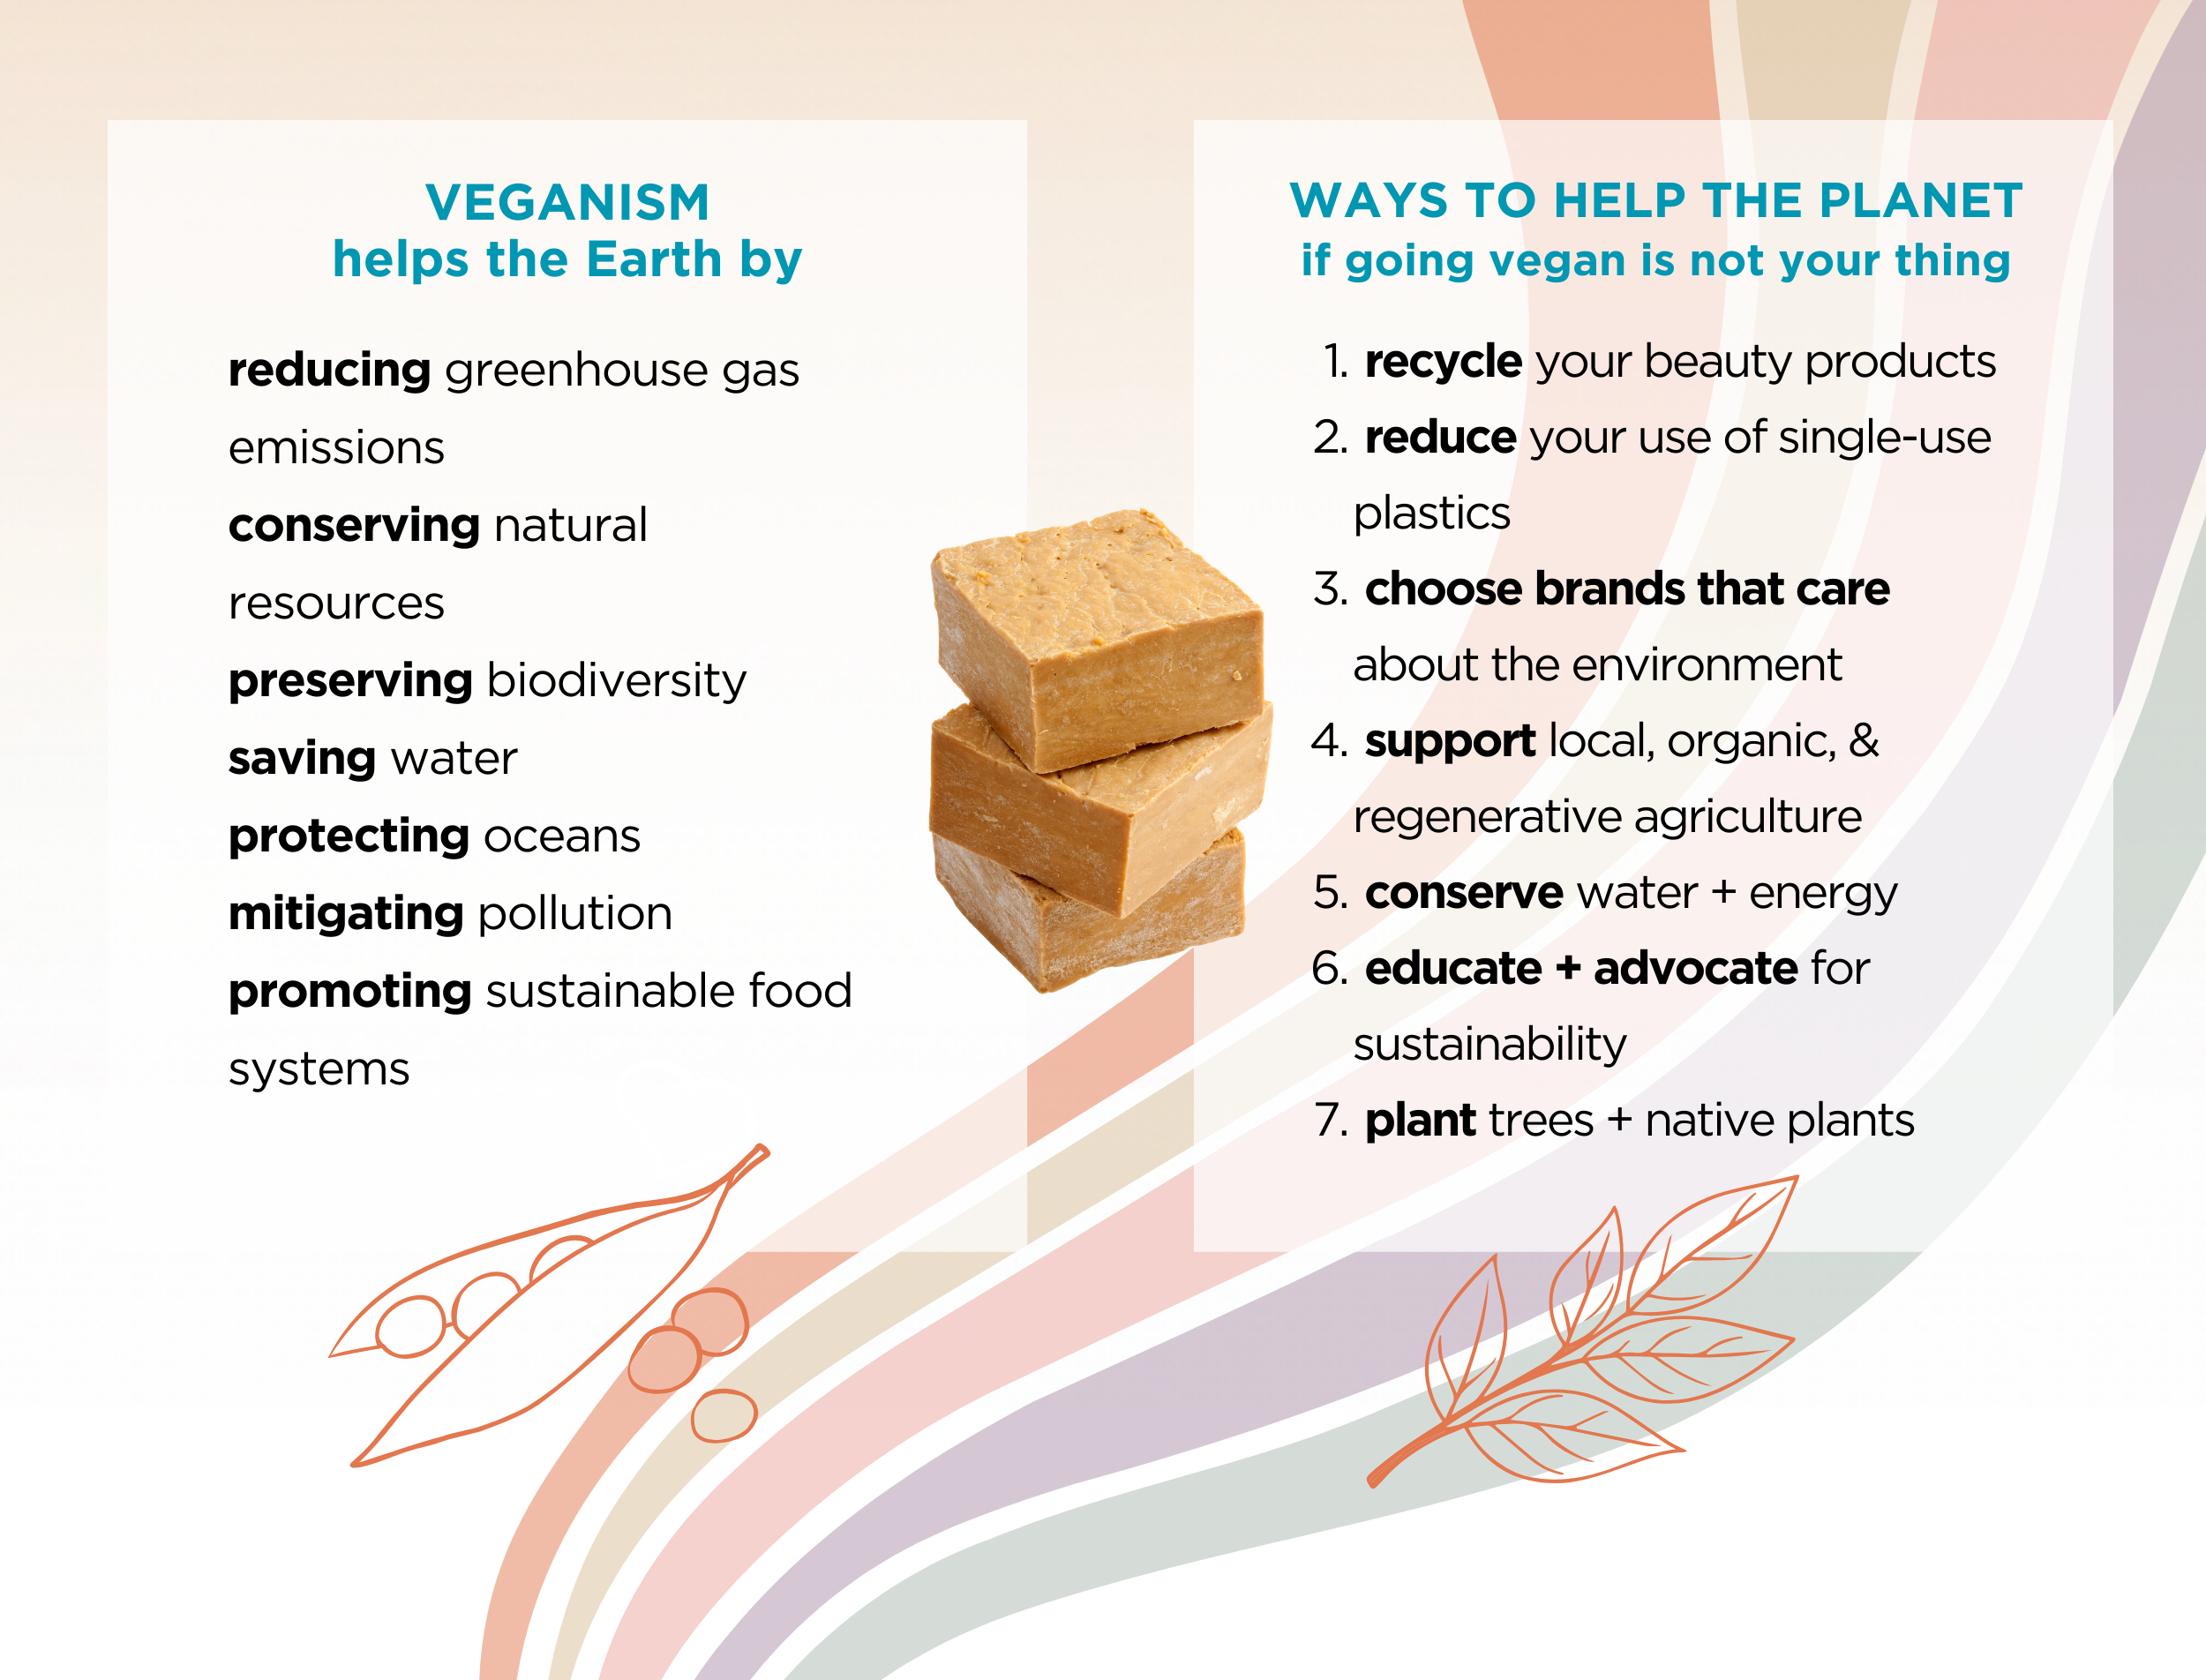 List of reasons veganism helps the earth. List of ways to also help the planet.